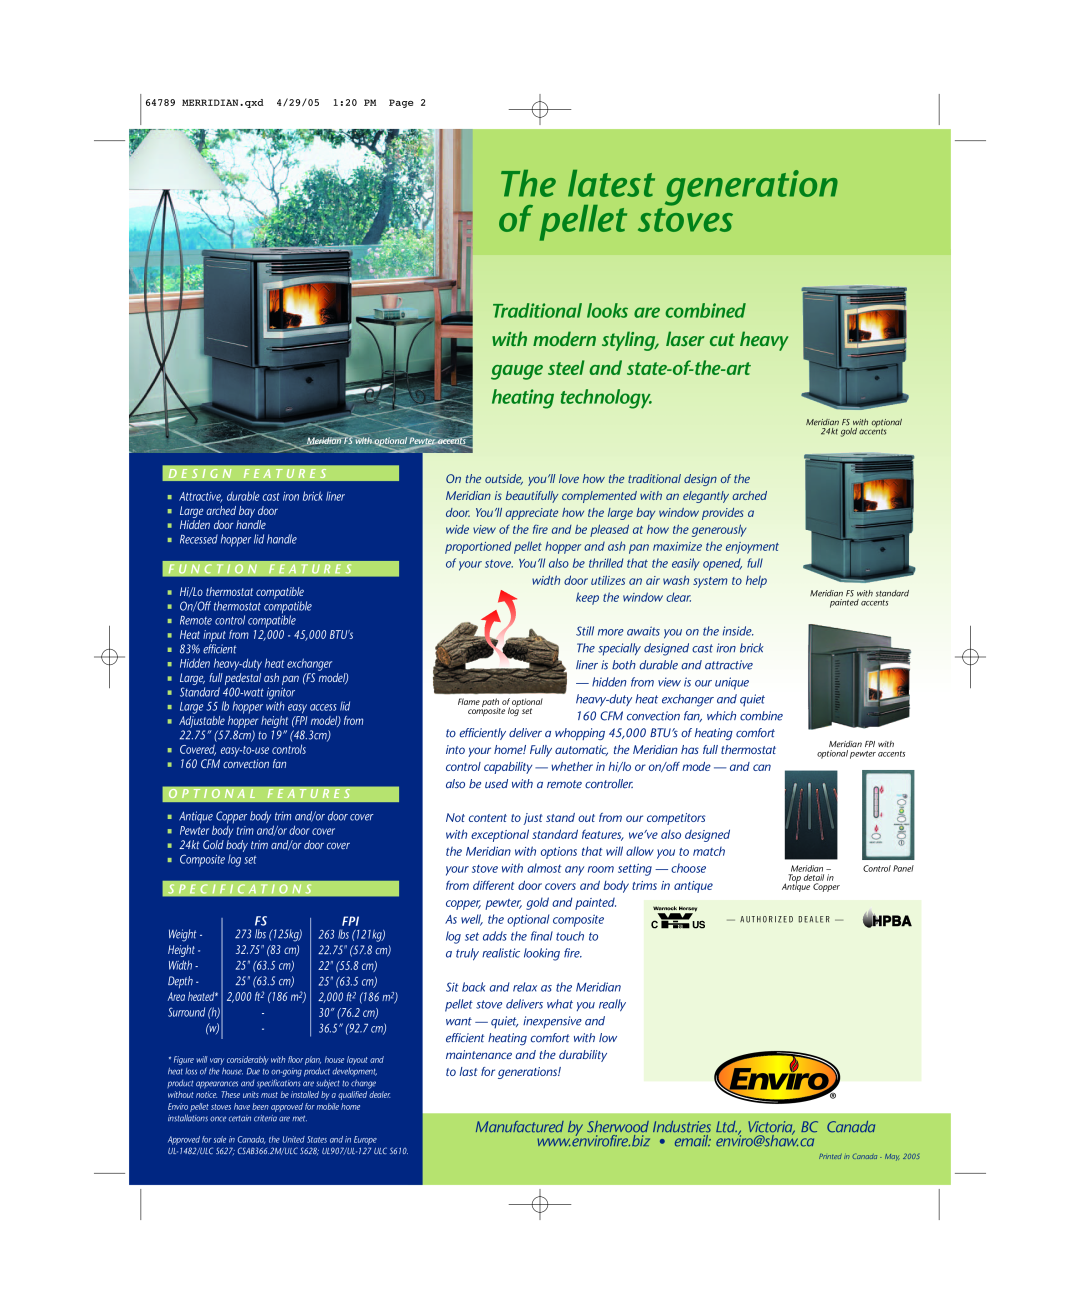 Enviro Meridian FS manual The latest generation of pellet stoves, gauge steel and state-of-the-art heating technology 